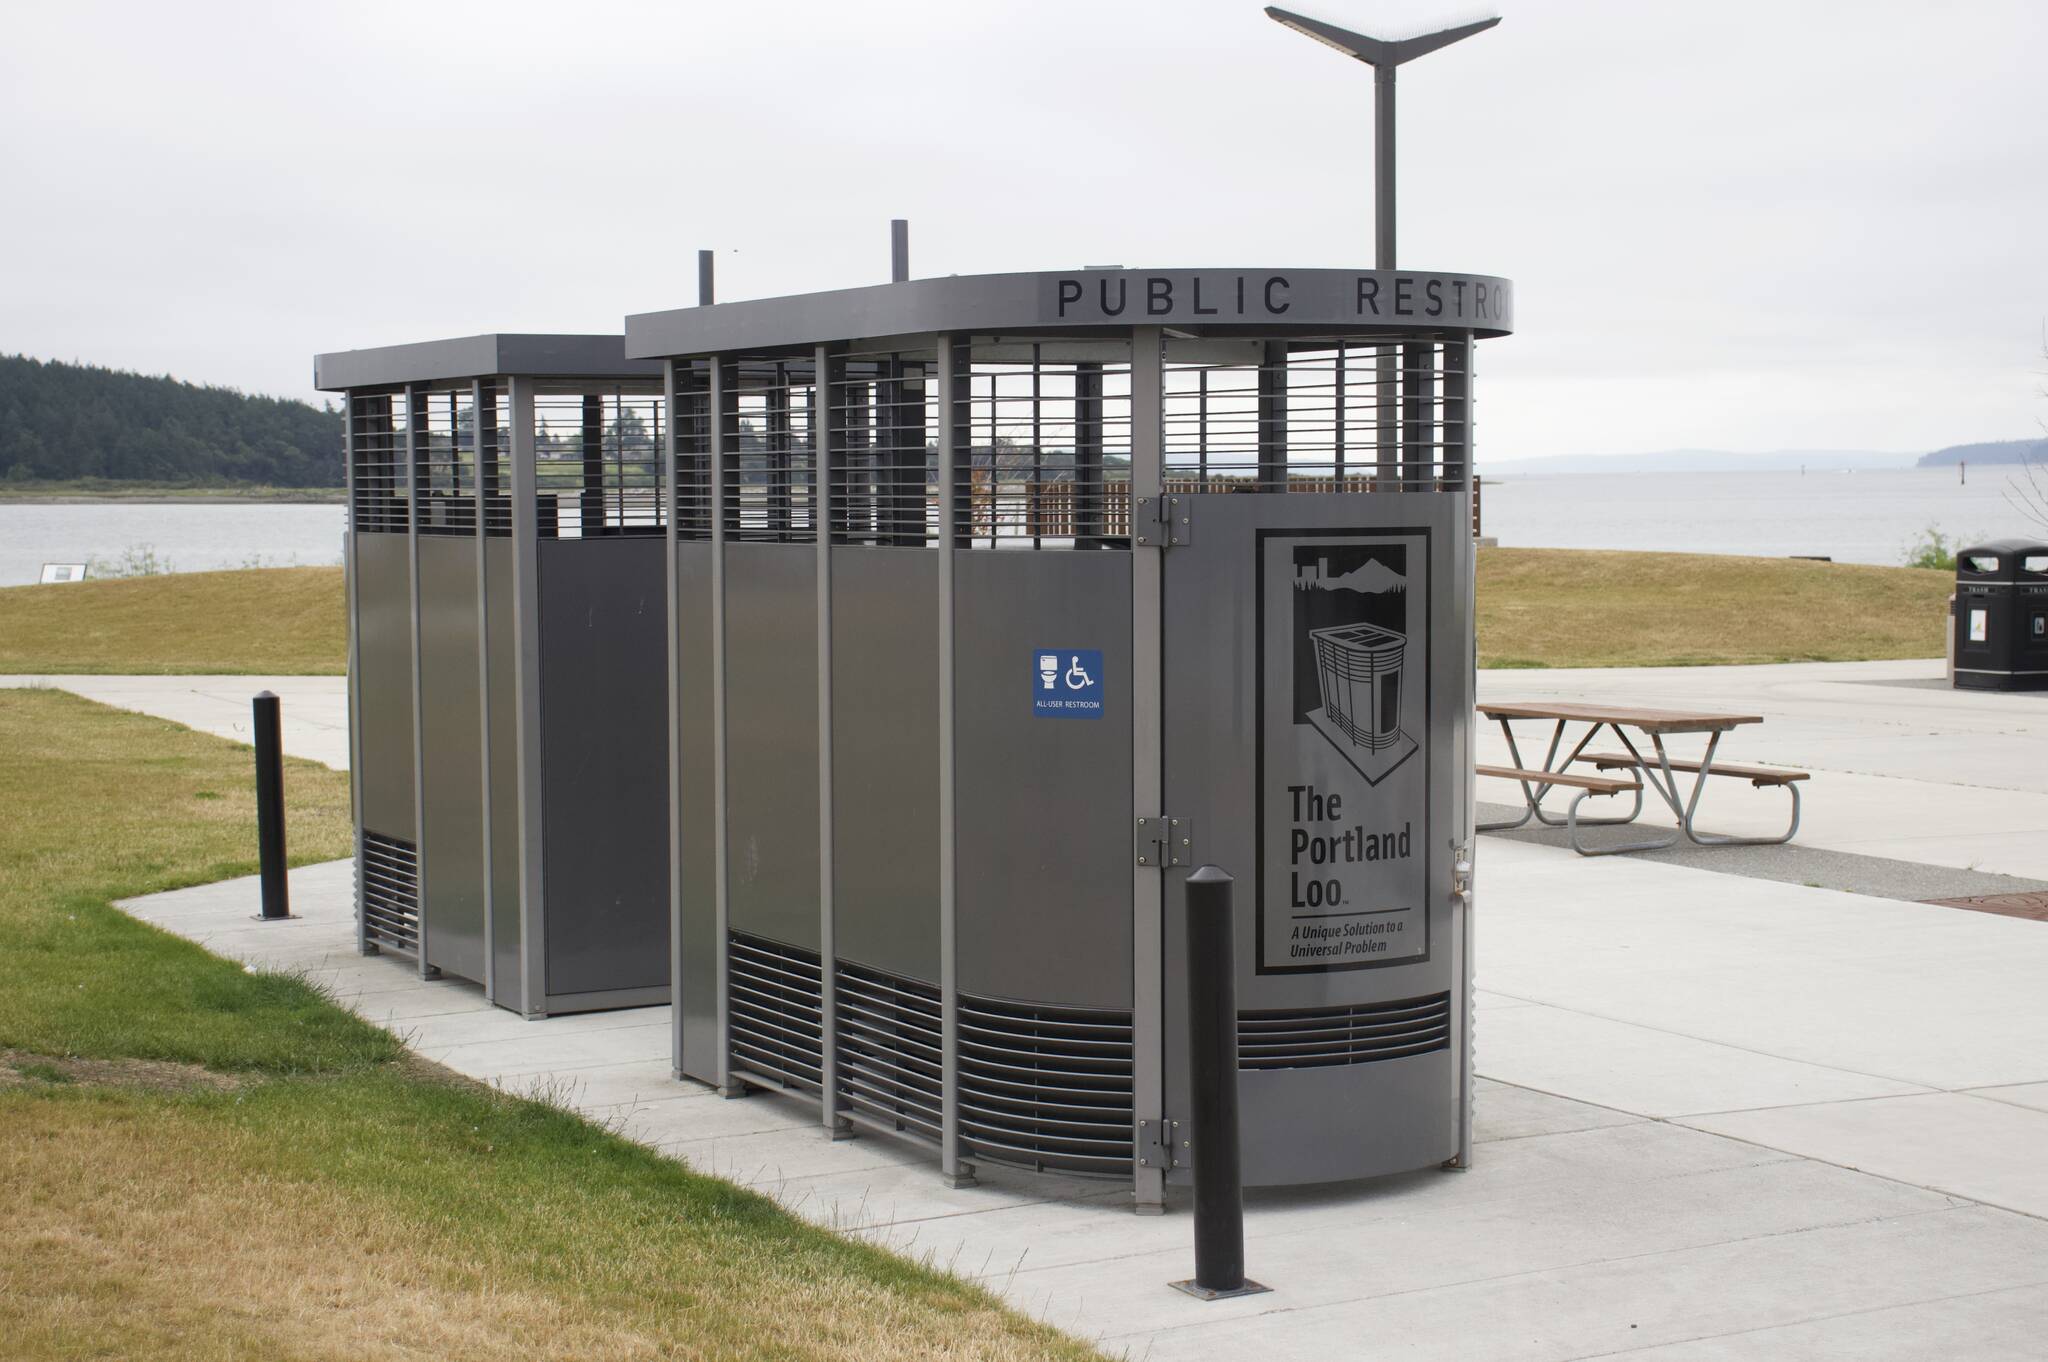 The two Portland loos at Windjammer Park. (Photo by Rachel Rosen/Whidbey News-Times.)